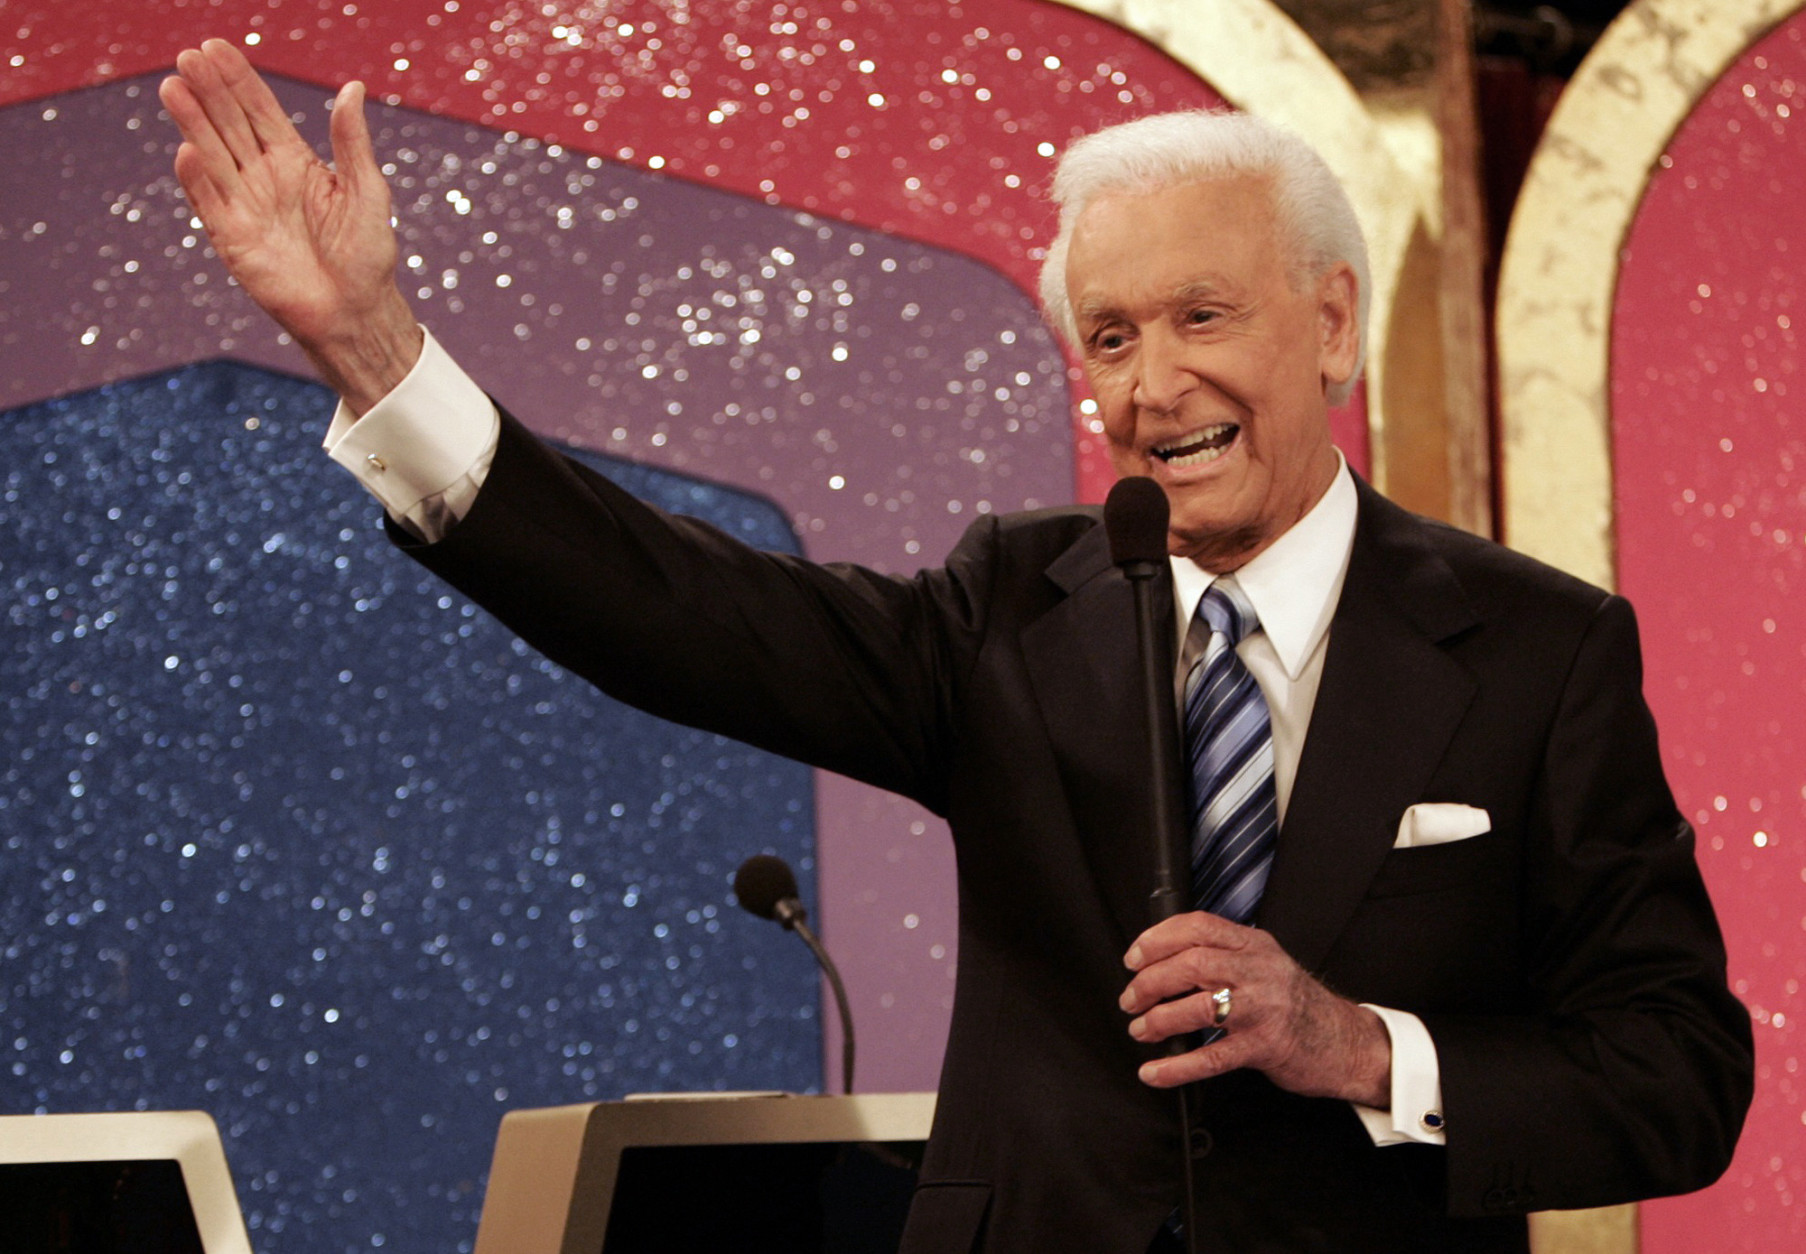 Legendary game show host Bob Barker, 83, waves goodbye as he tapes his final episode of "The Price Is Right" in Los Angeles on Wednesday, June 6, 2007. Bob Barker signed off on 35 years on "The Price Is Right" and 51 years in television in the same low-key, genial fashion that made him one of daytime TV's biggest stars.  